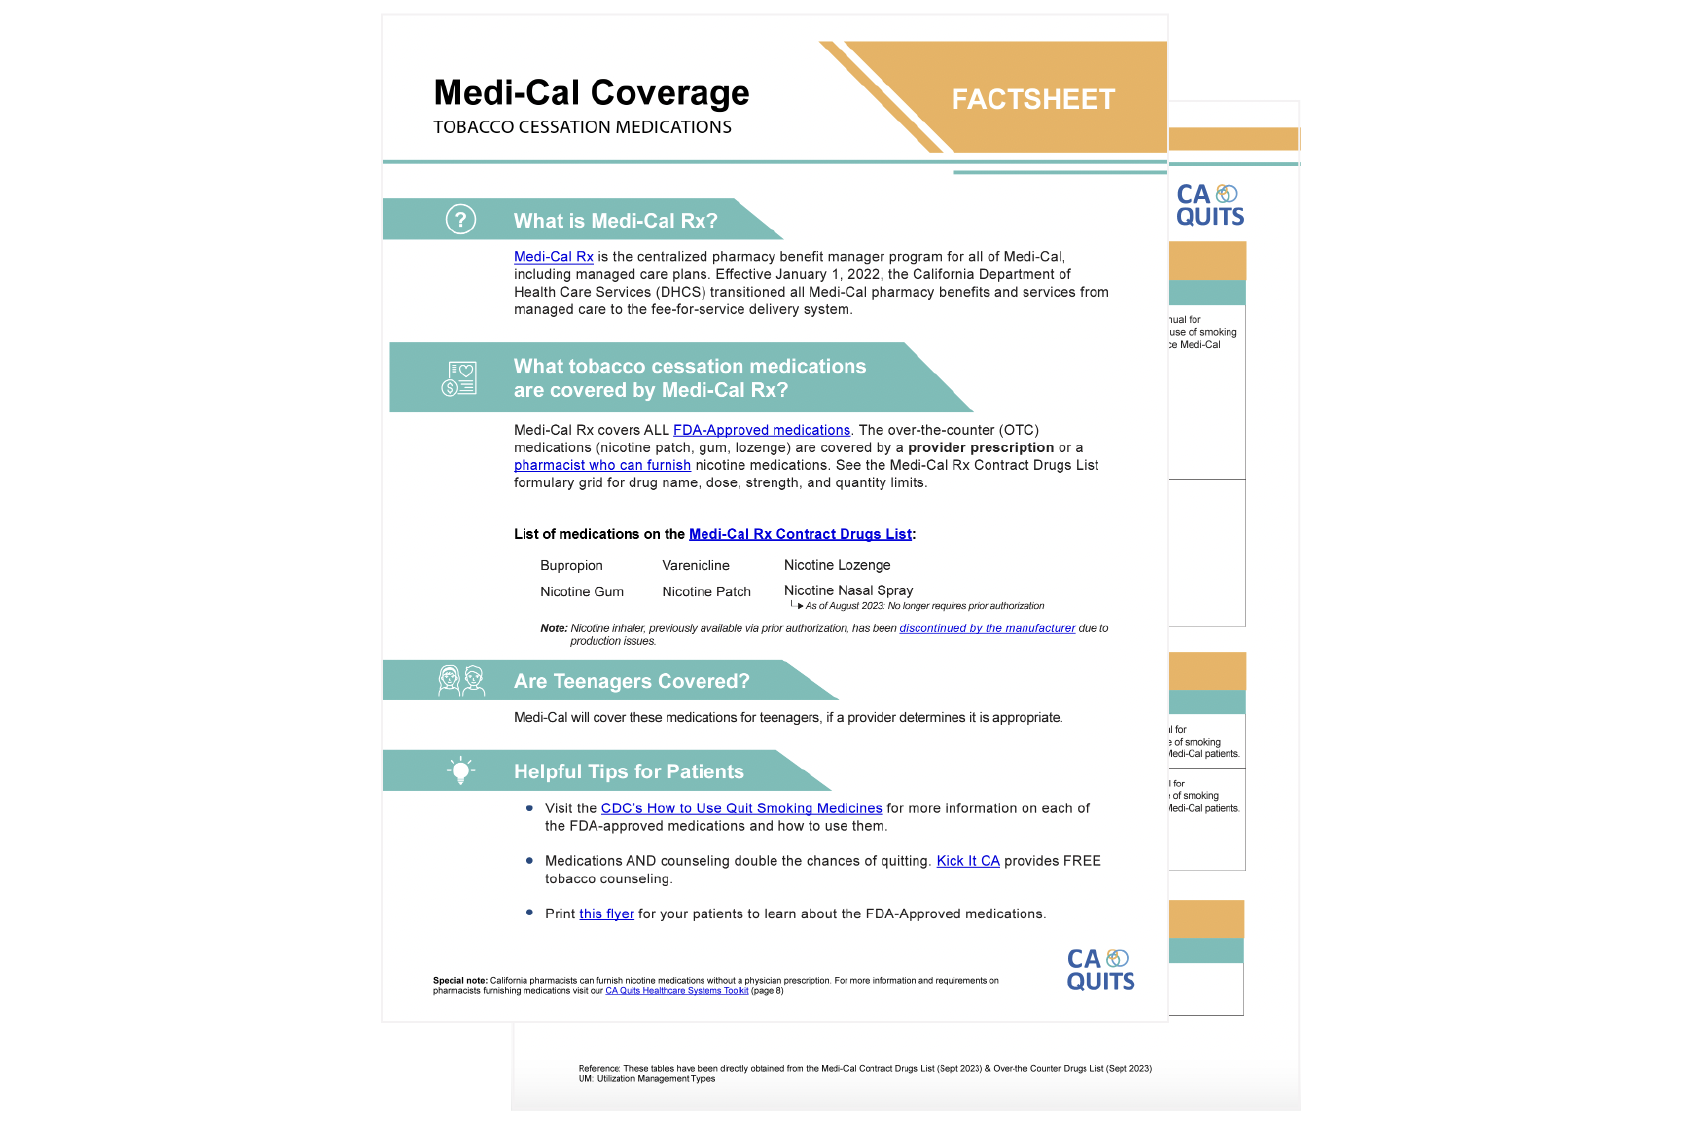 An image of the Medi-Cal Rx factsheet